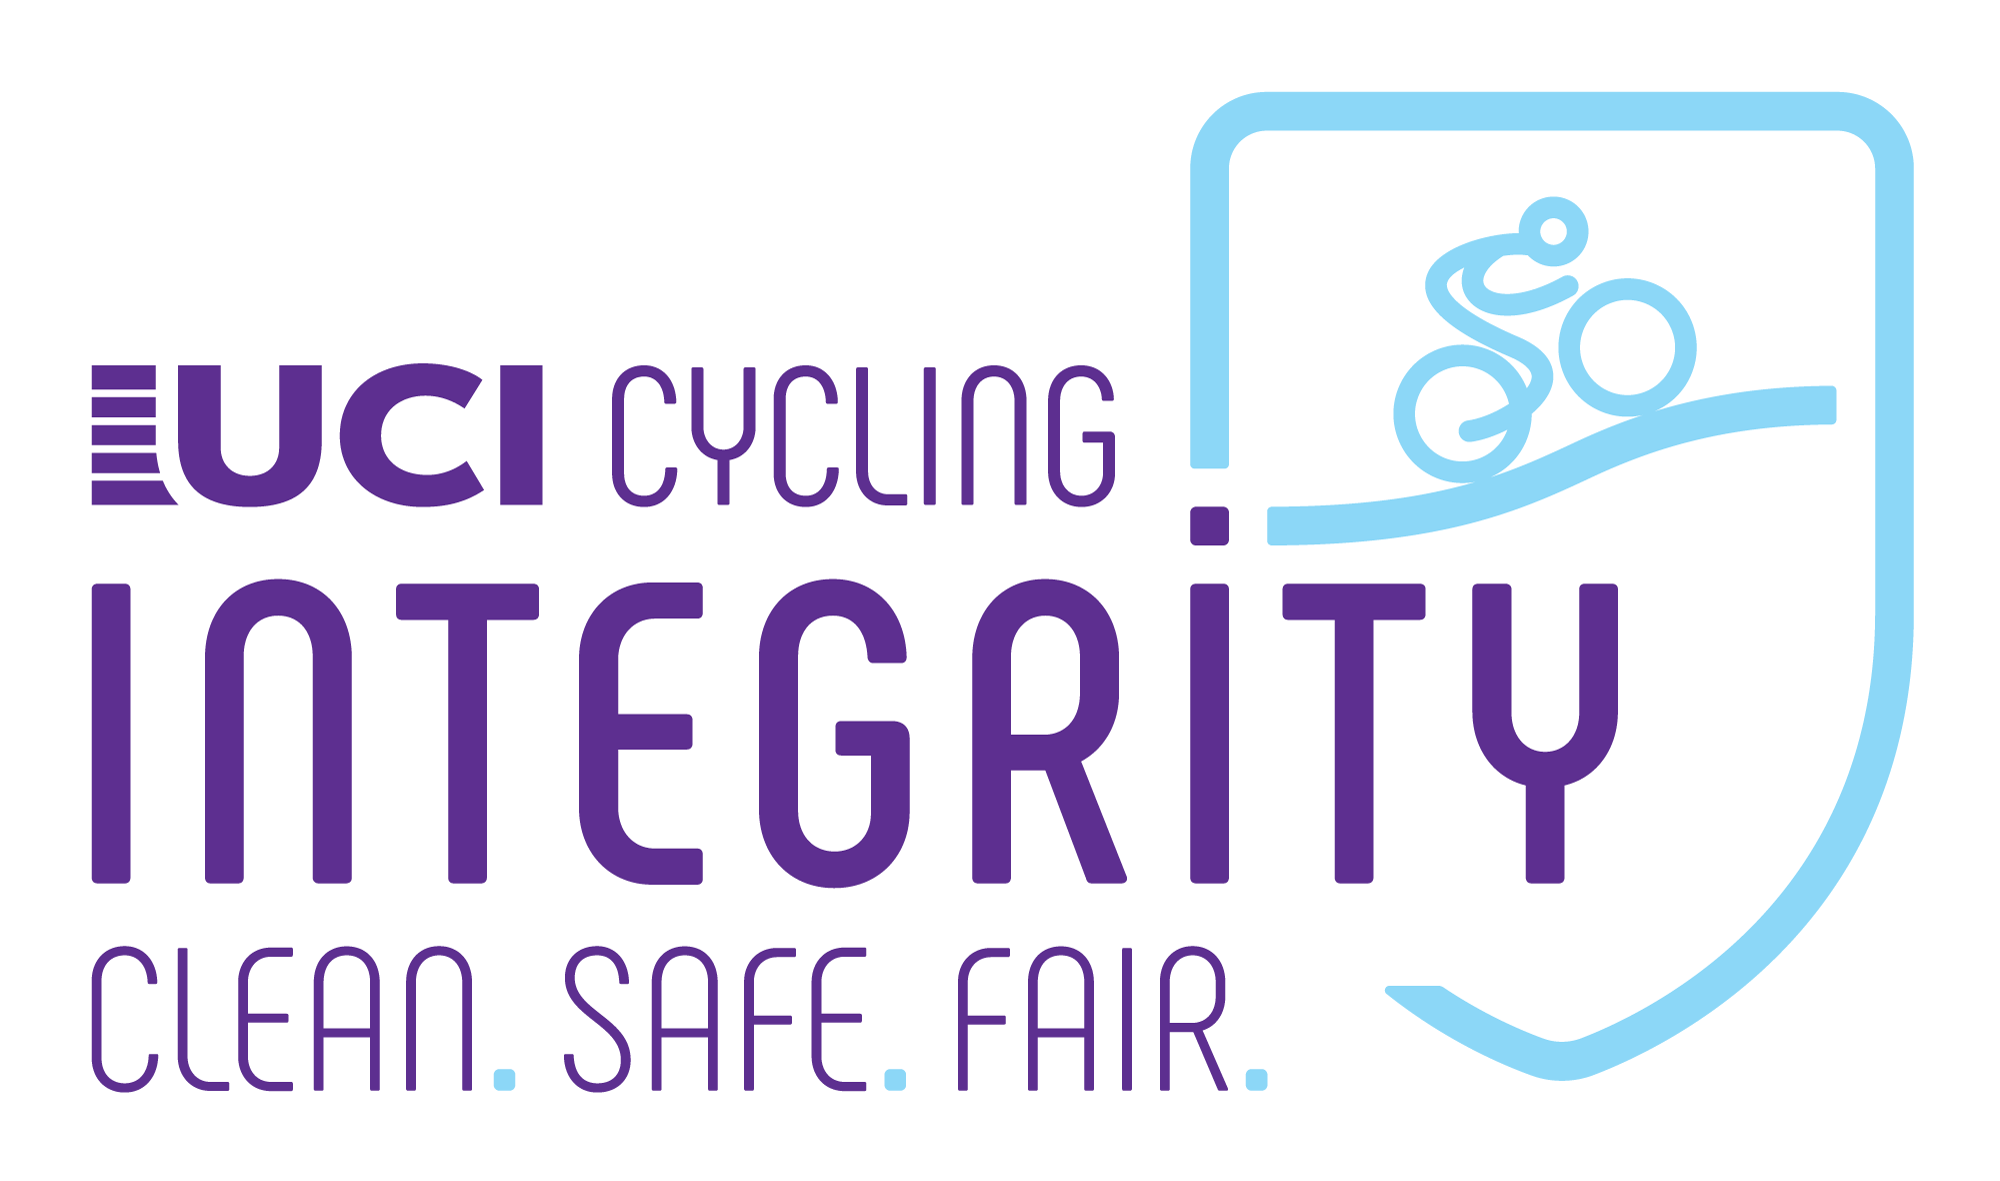 The UCI has revealed a Cycling Integrity brand ©UCI